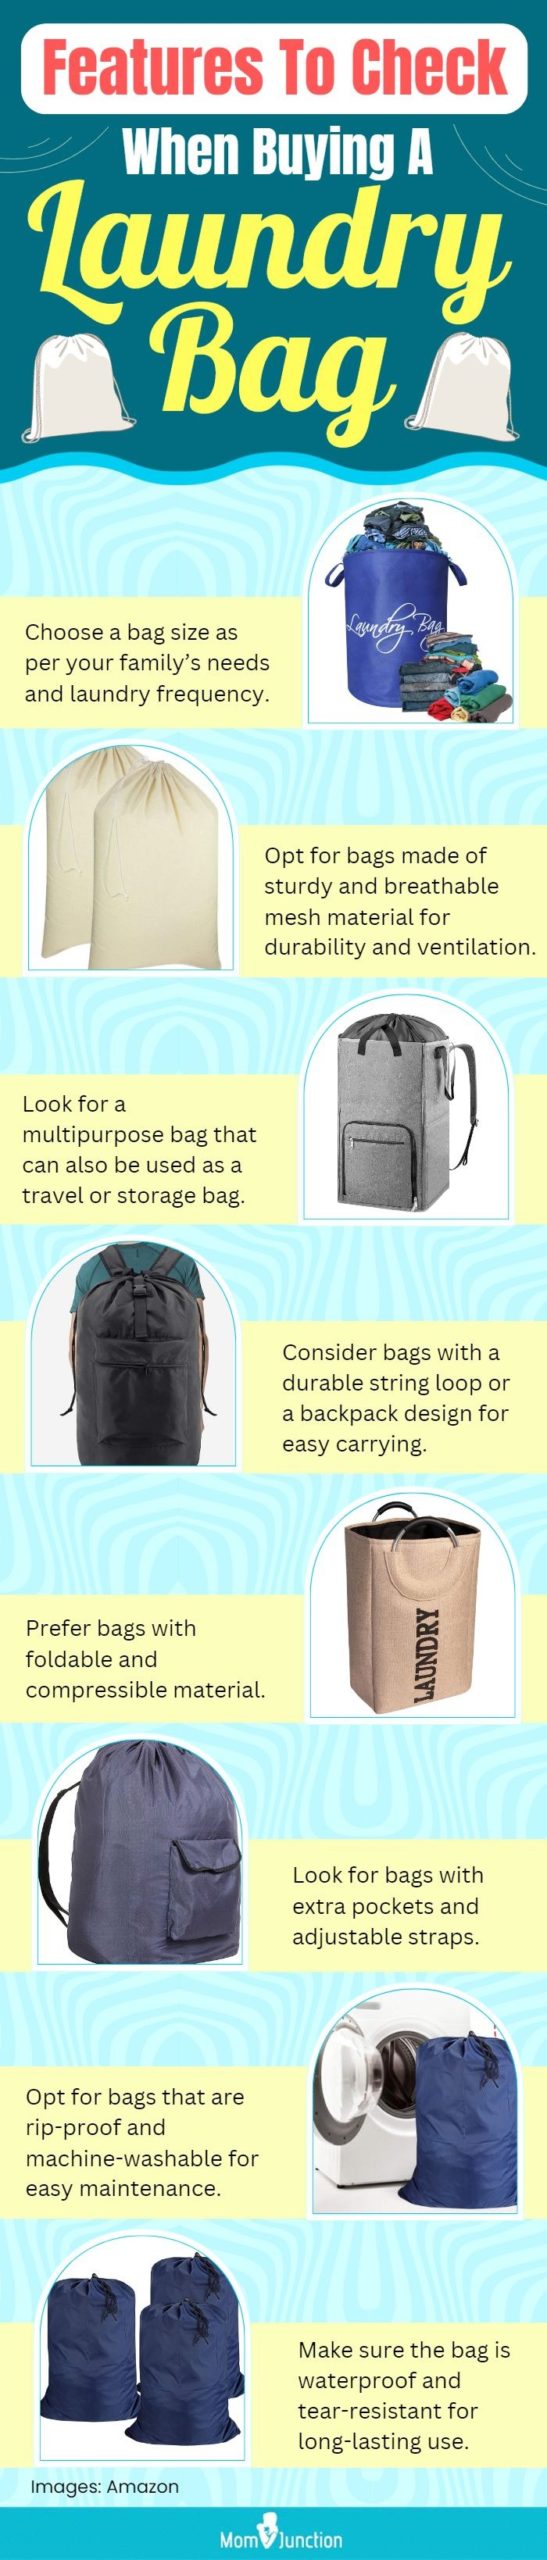 Features To Check When Buying A Laundry Bag (infographic)